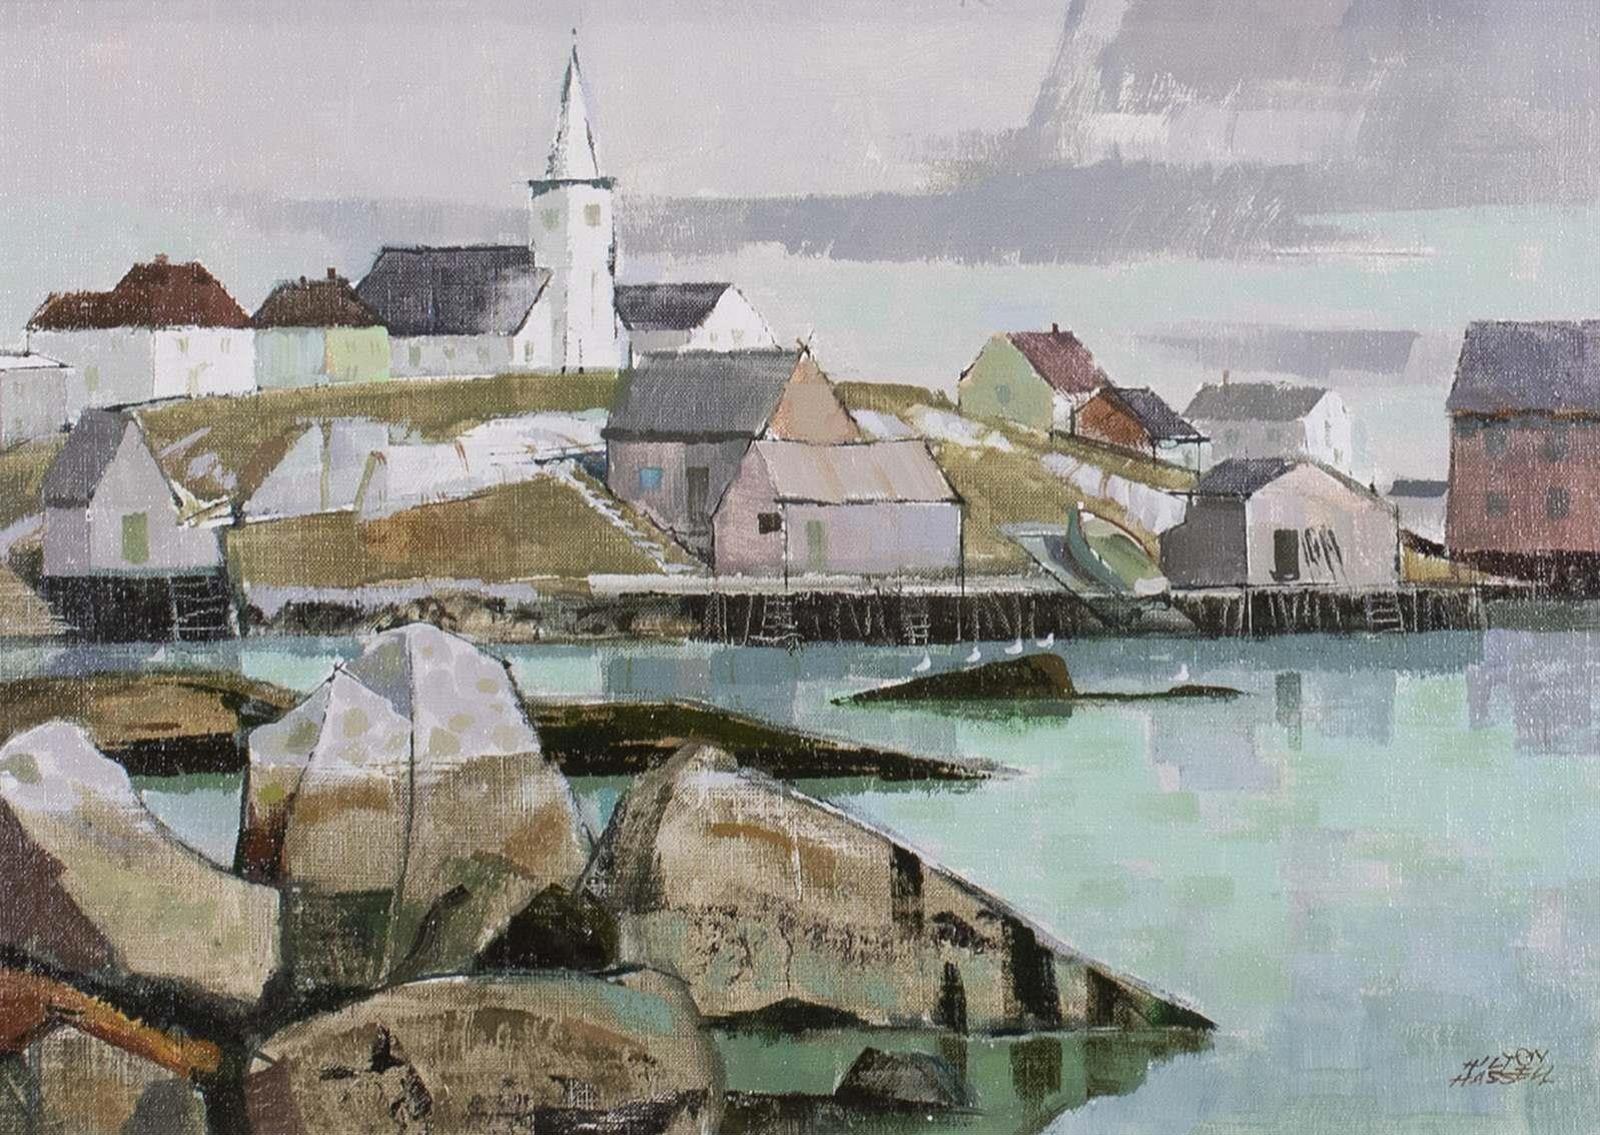 Hilton MacDonald Hassell (1910-1980) - Village Of Prospect Harbour, N.S.; 1979